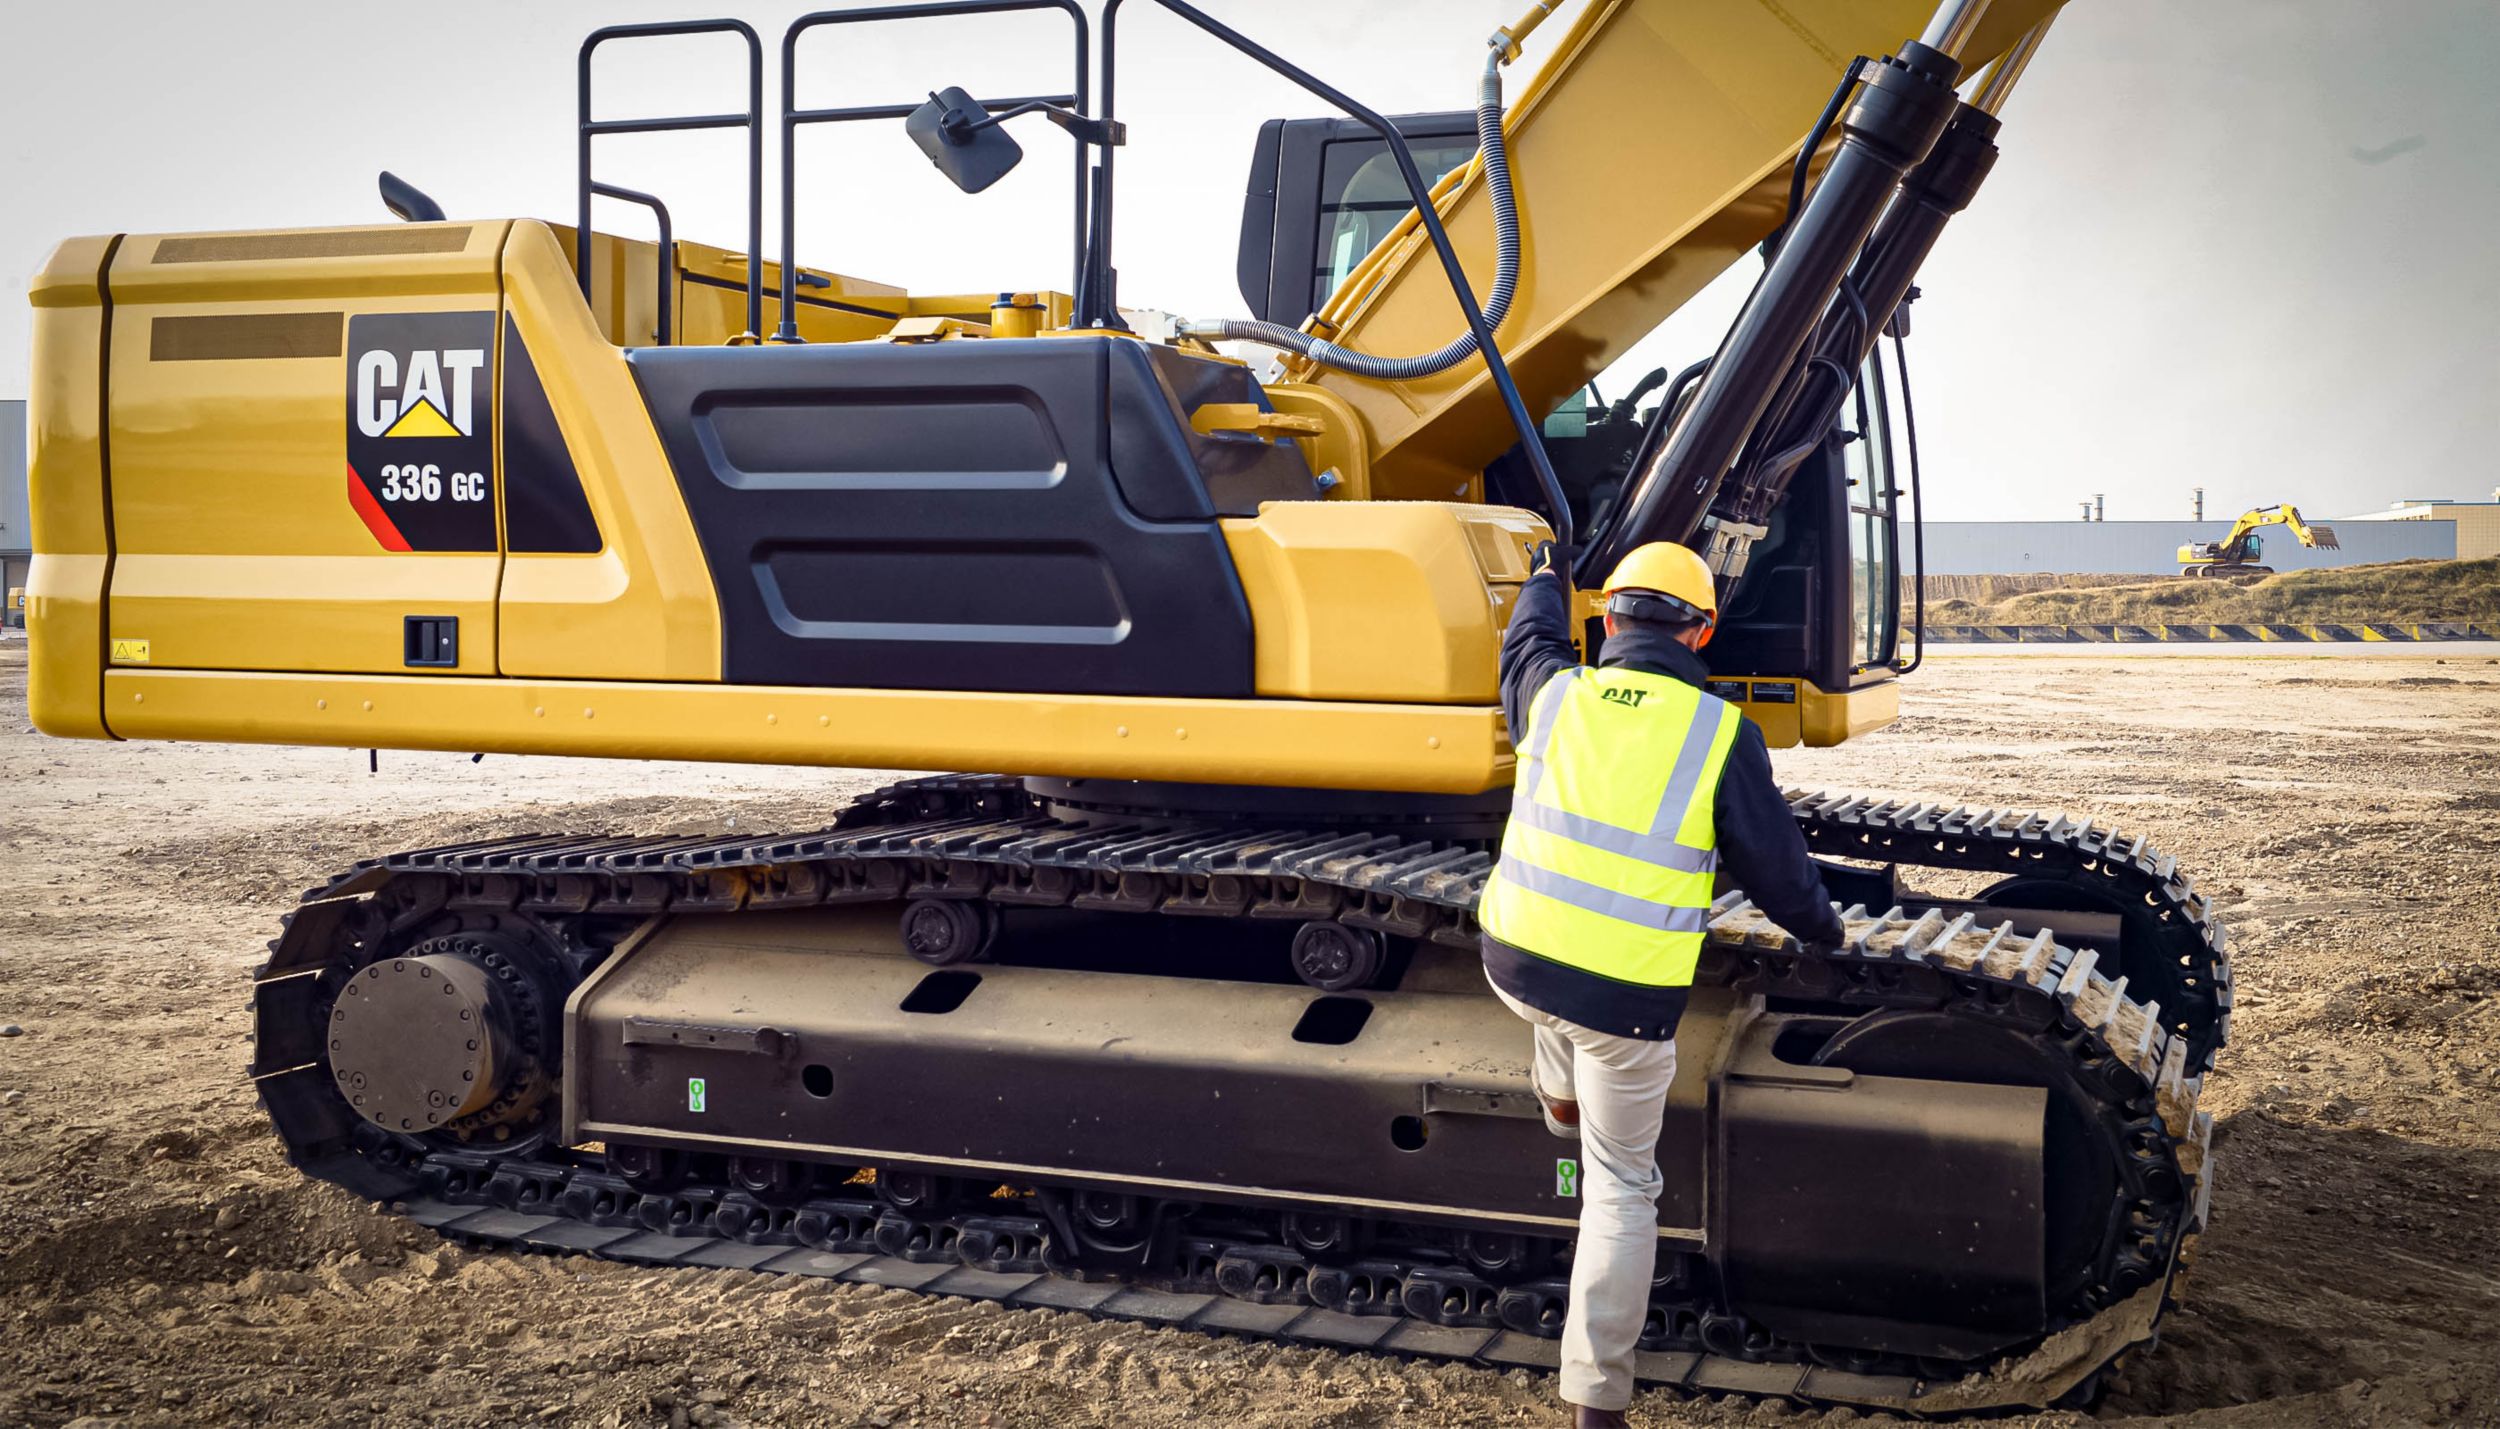 Cat 336 GC Hydraulic Excavator - BUILT-IN SAFETY FEATURES